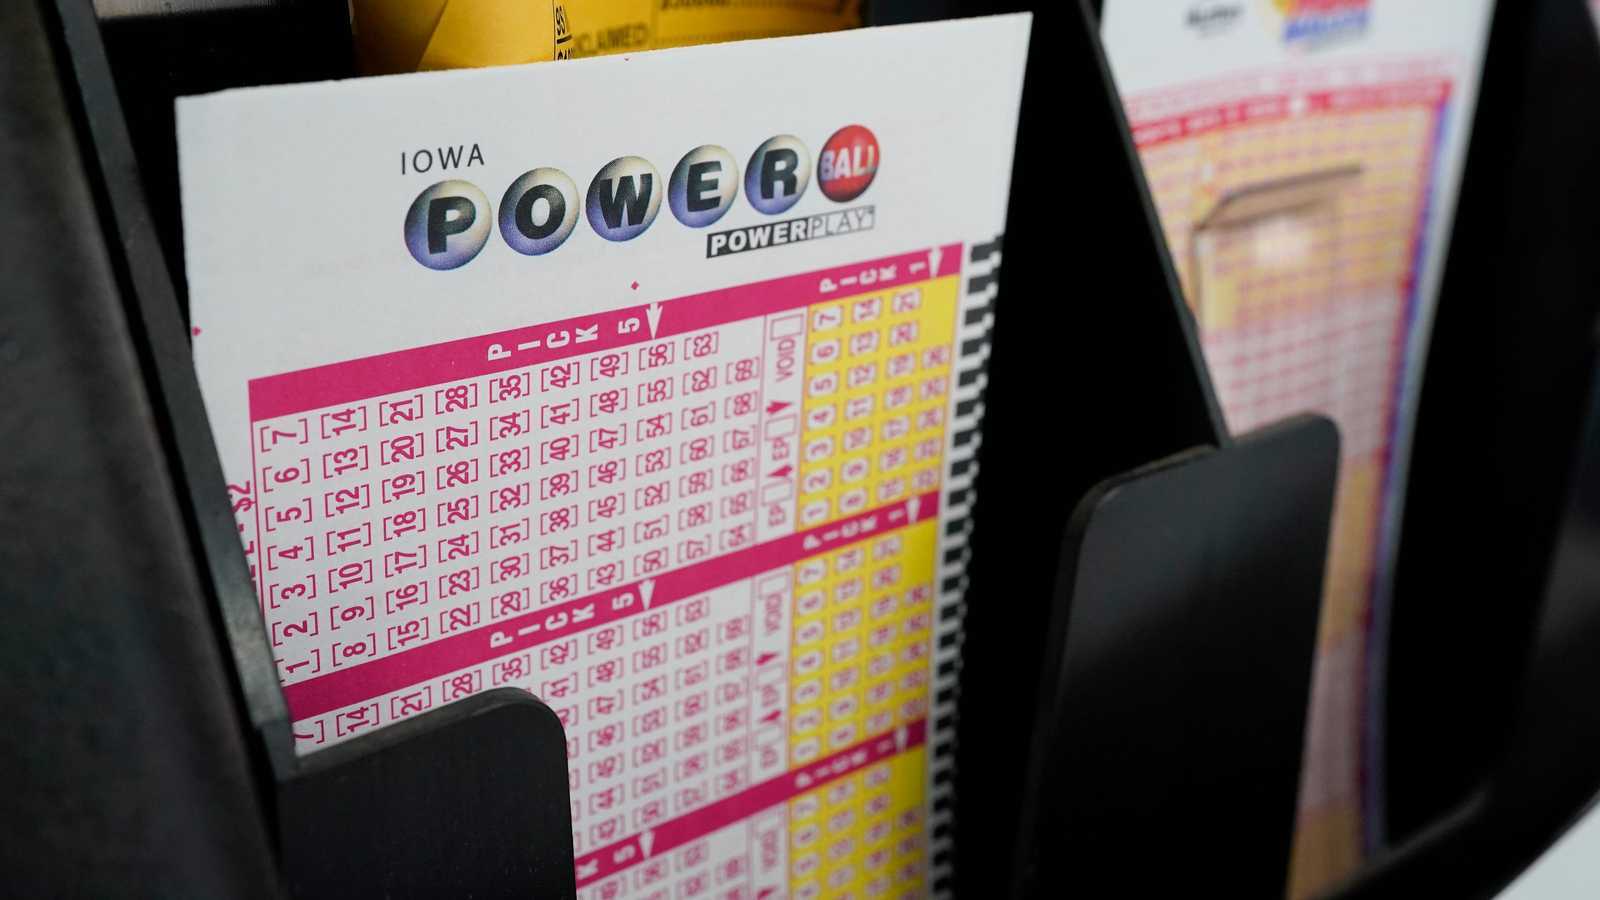 Does 2 Numbers In Powerball Win Anything